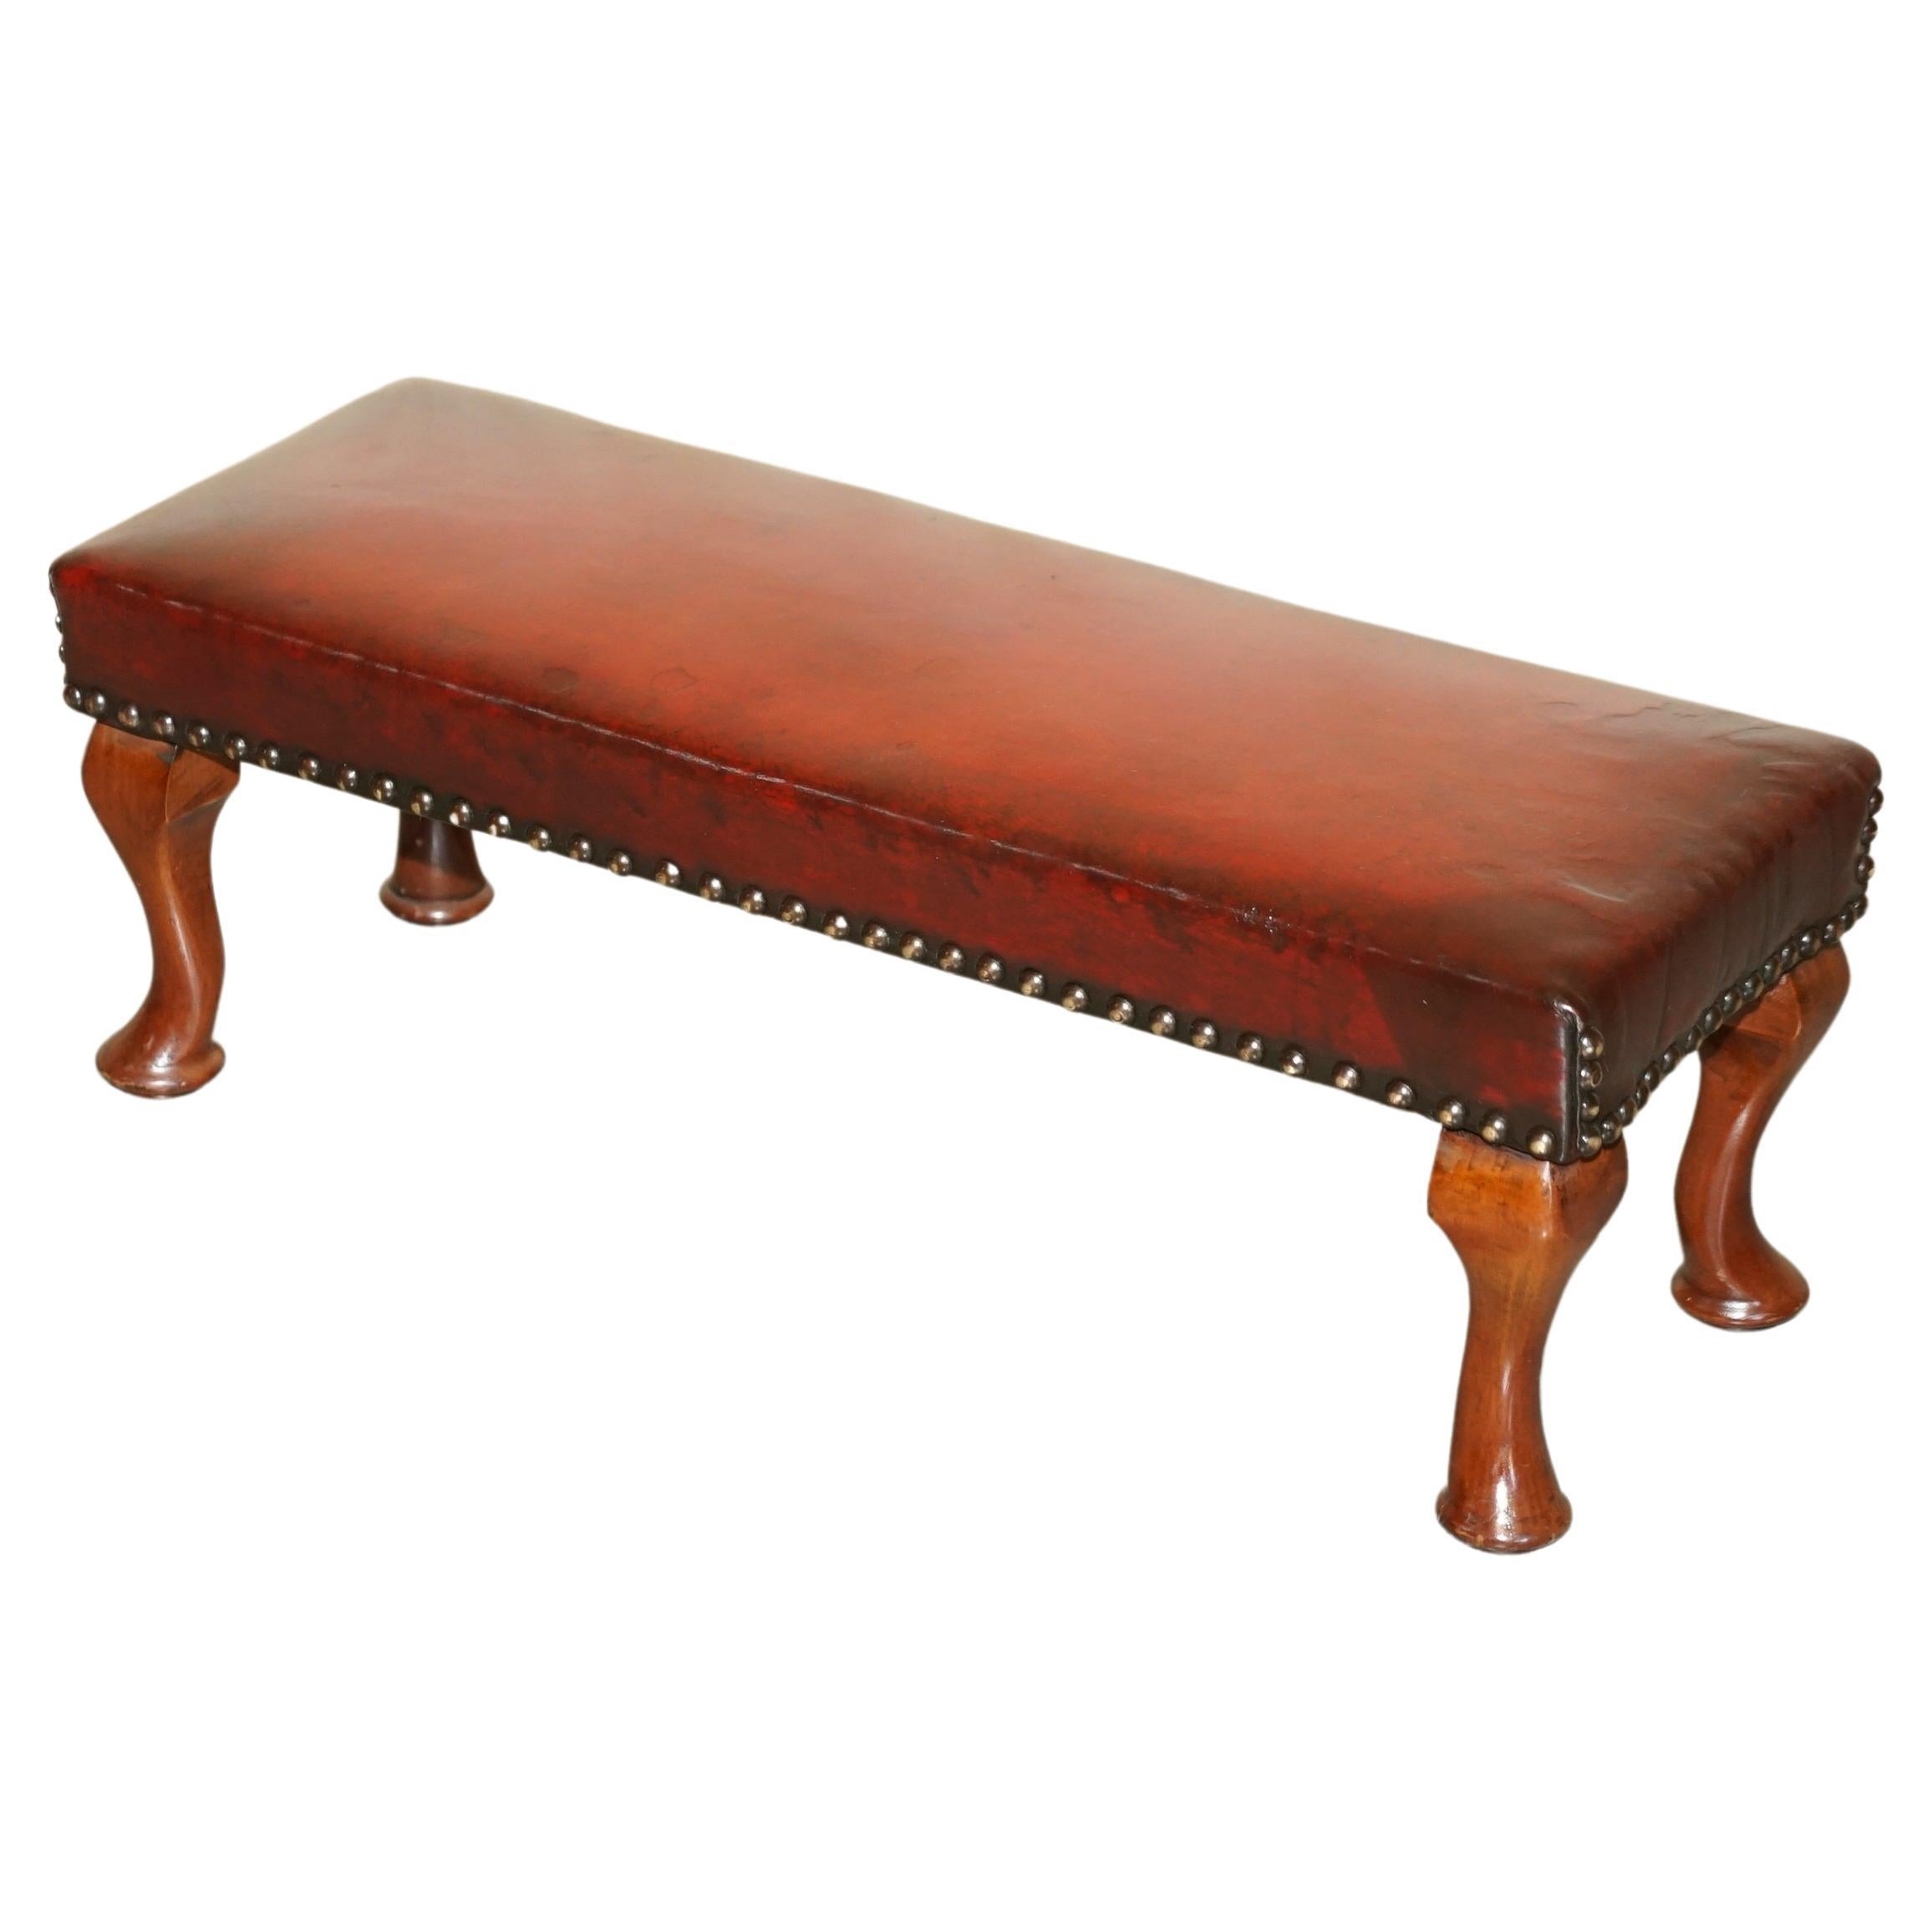 Antique Cabriolet Leg Fully Restored Hand Dyed Bordeaux Leather Tufted Footstool For Sale